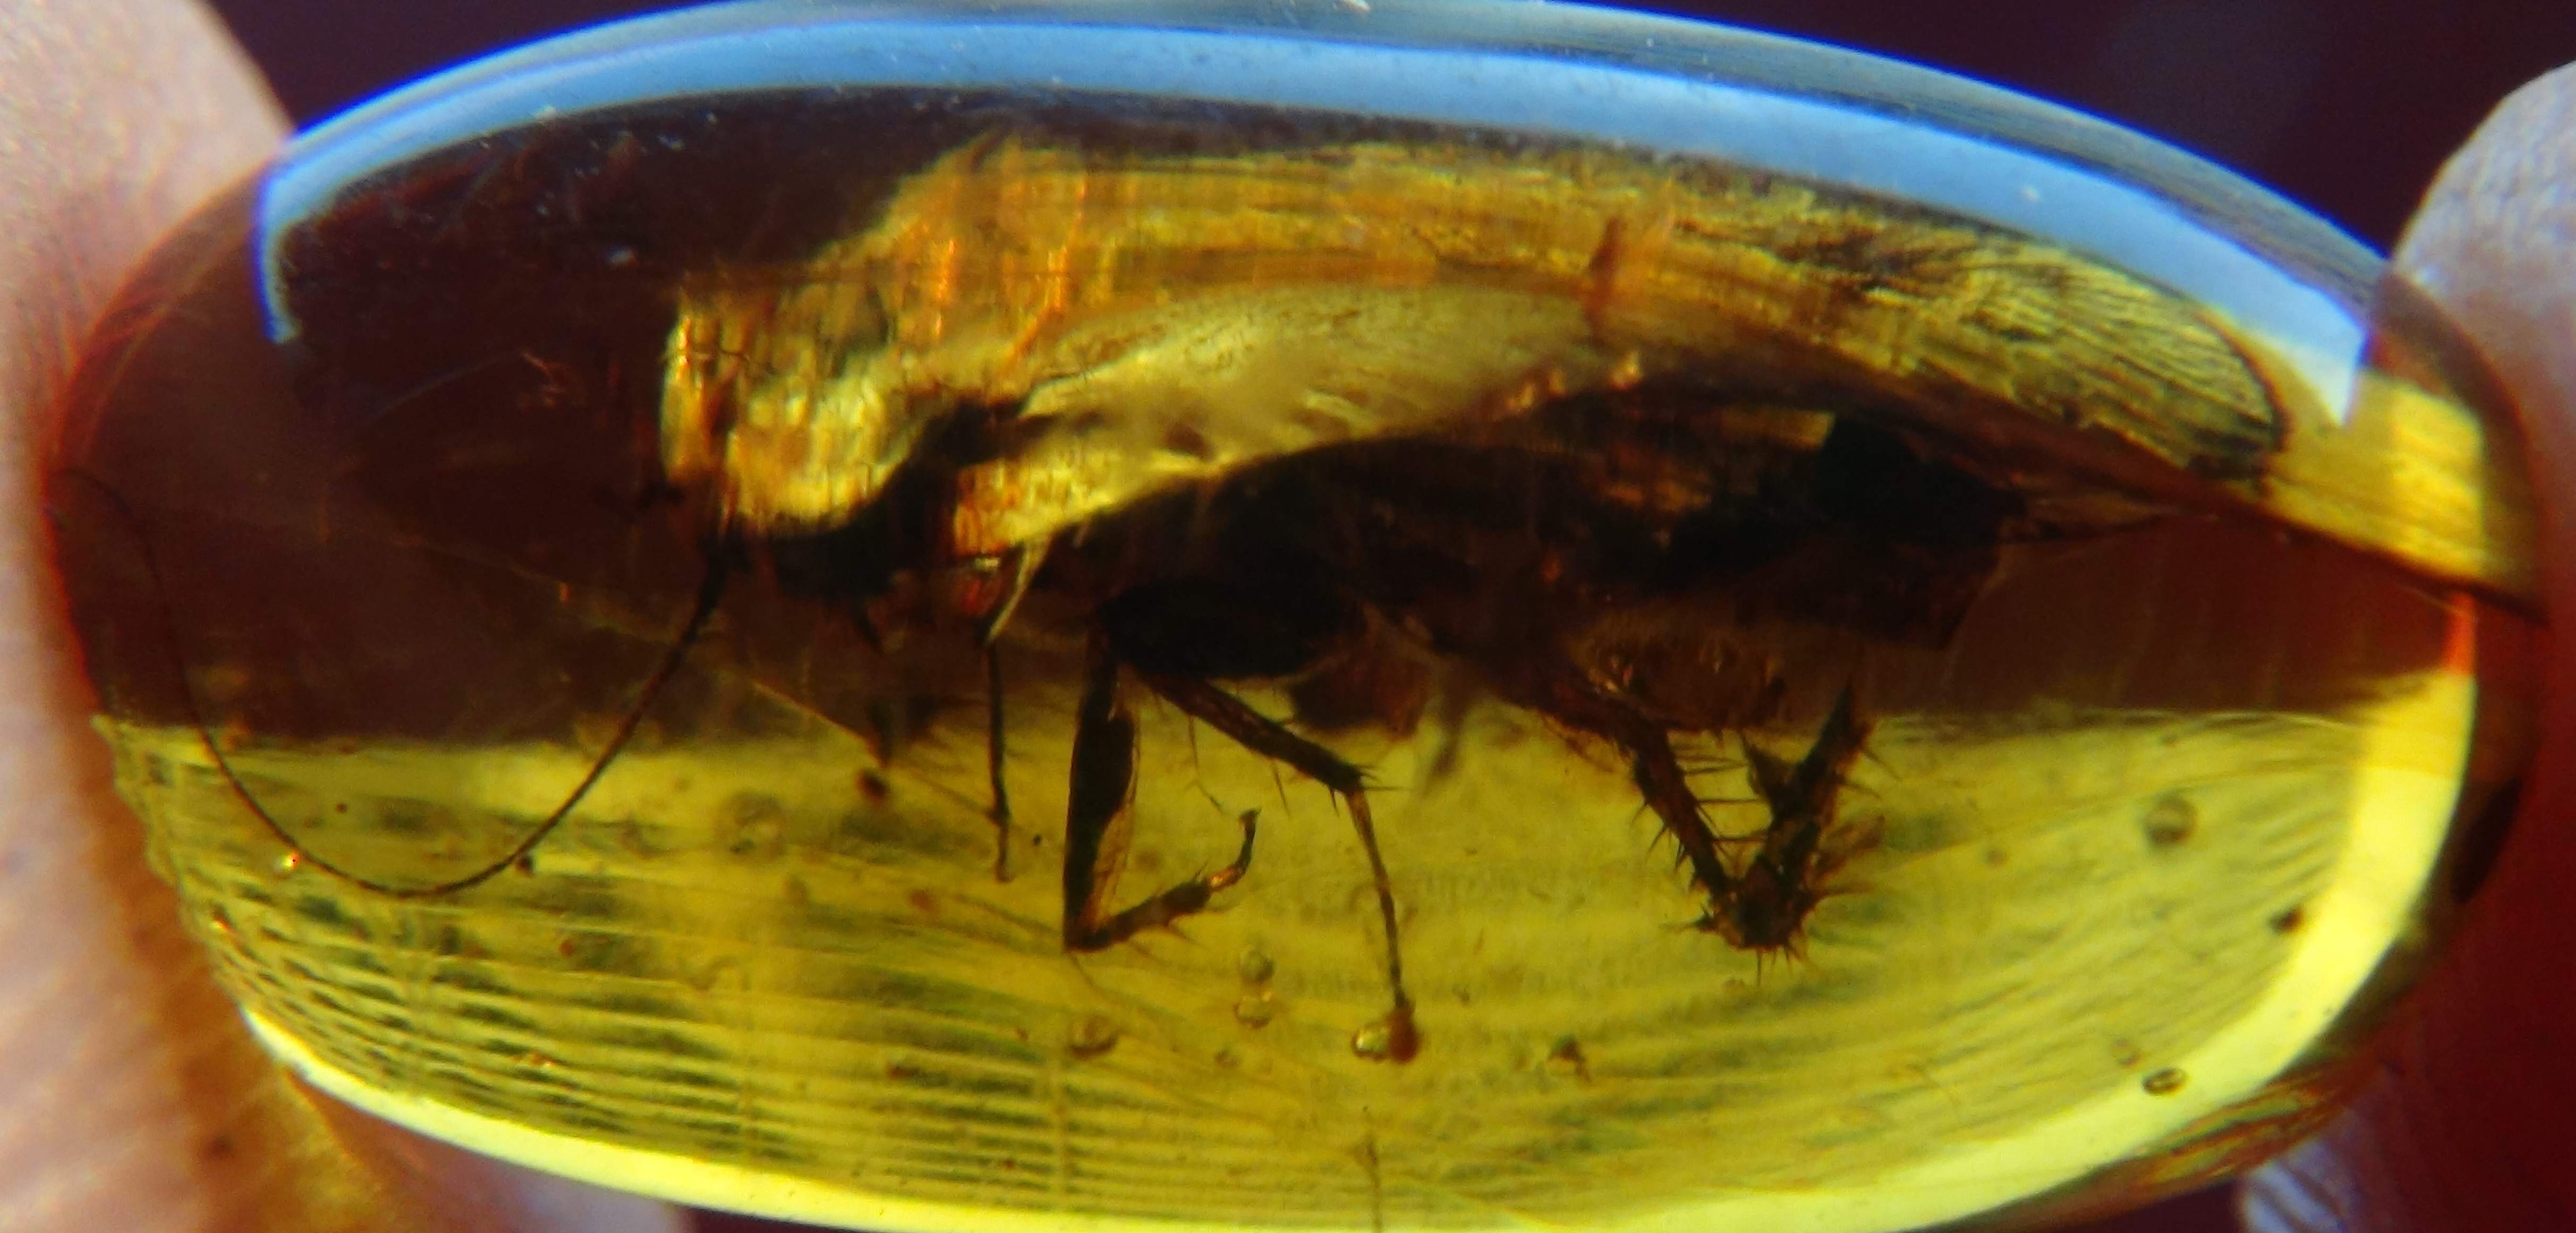 cockroach in amber